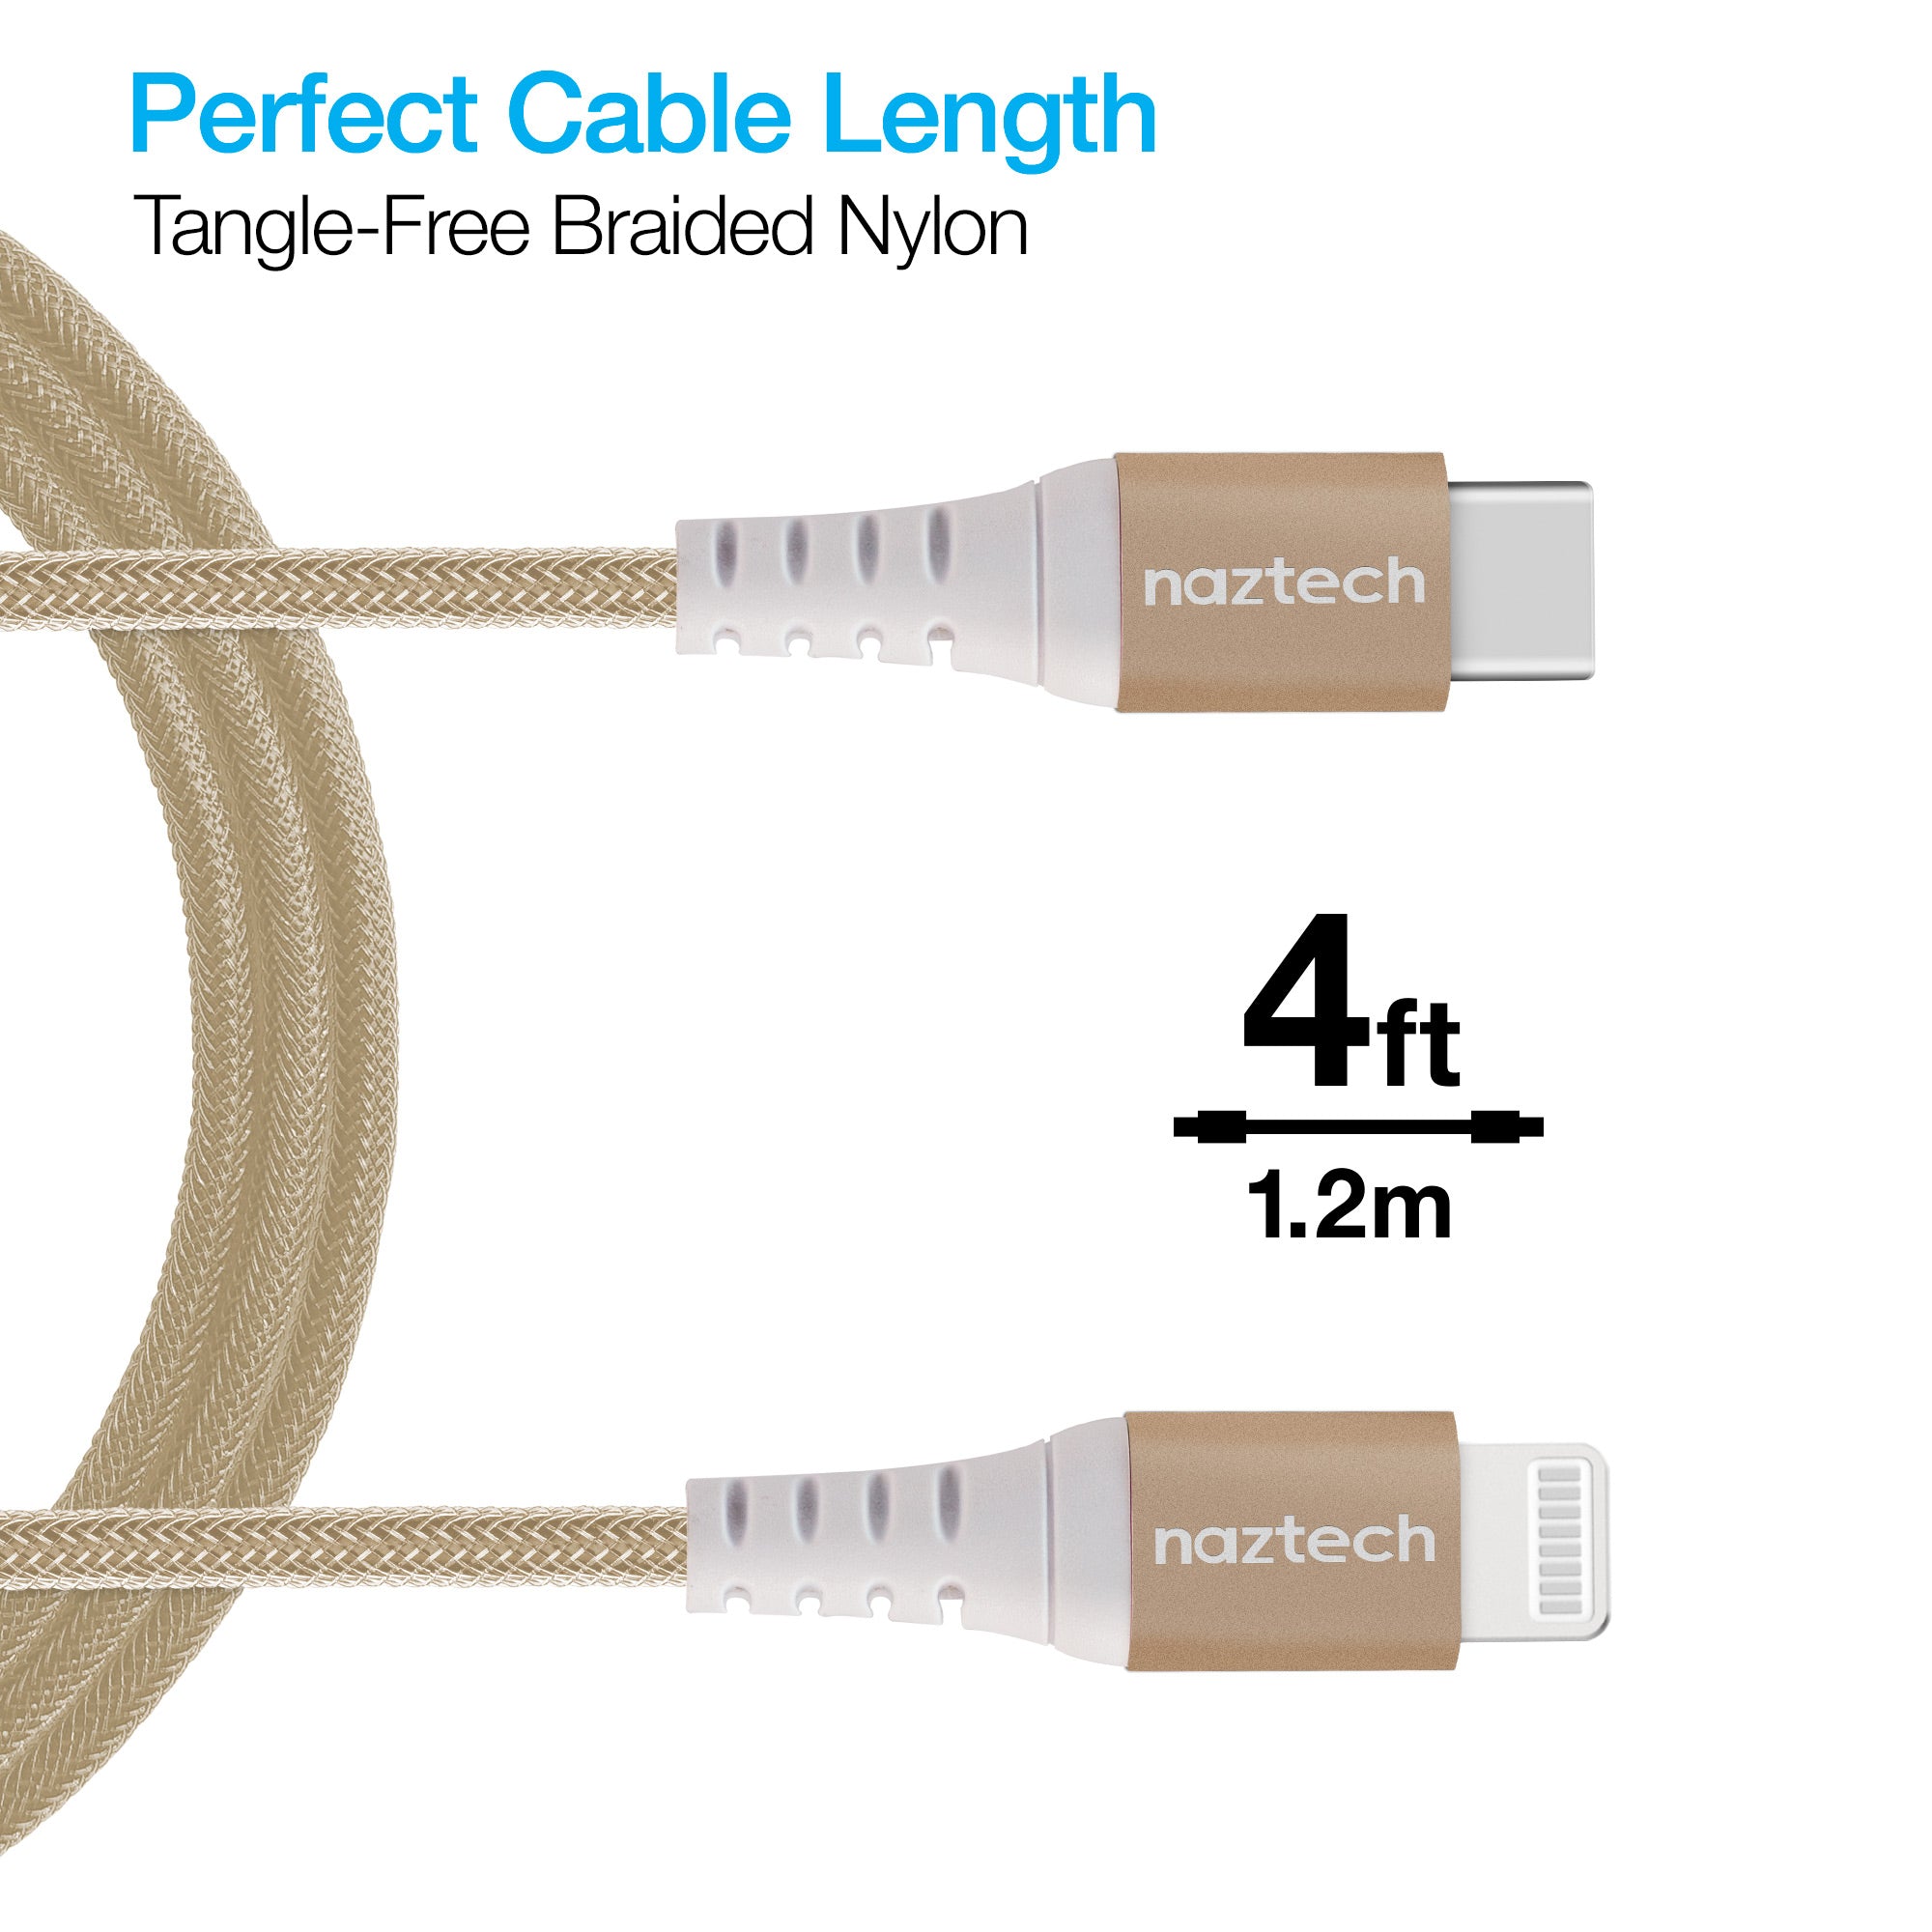 Apple MFi Certified USB C to Lightning Cable Made for iPhone X/XS/XR/XS Max  / 8/8 Plus, Supports Power Delivery (for Use with Type C Chargers) 4FT